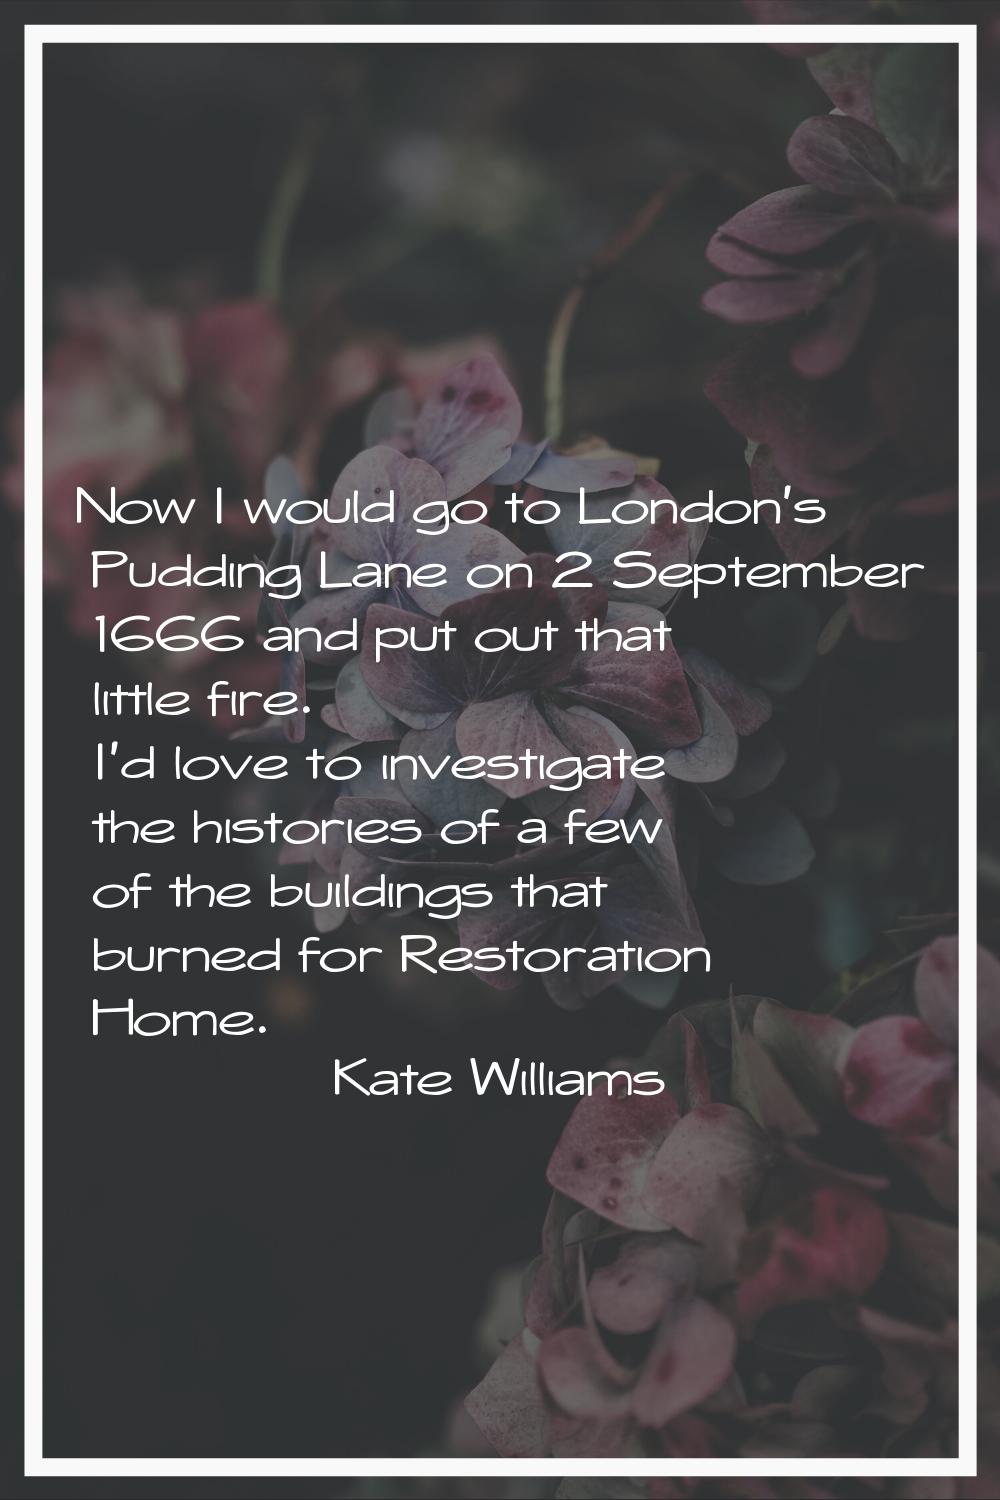 Now I would go to London's Pudding Lane on 2 September 1666 and put out that little fire. I'd love 